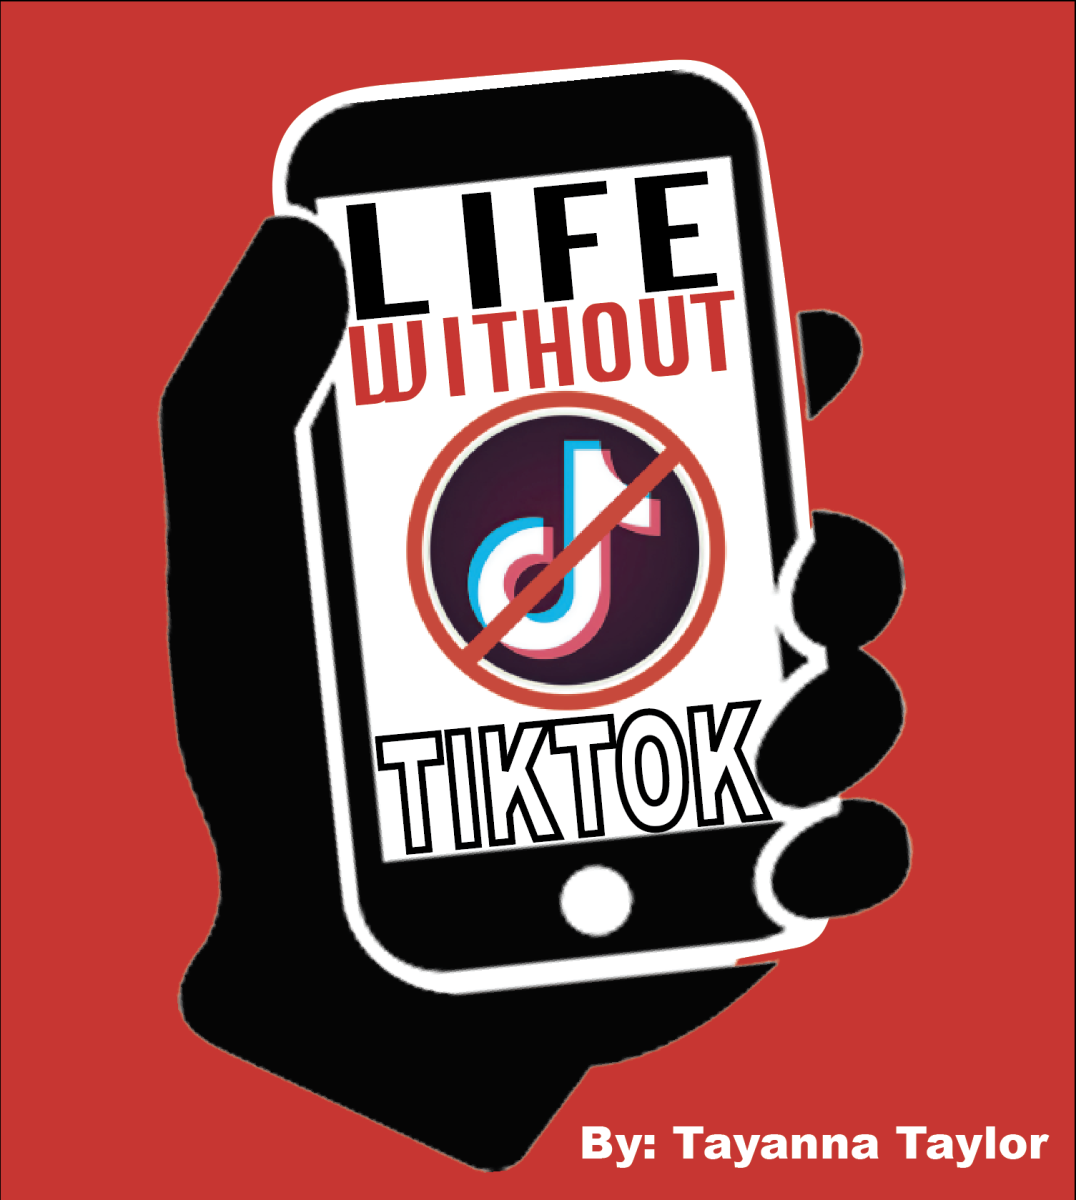 With the threat of closing down TikTok here in the U.S.- what are the alternatives? 